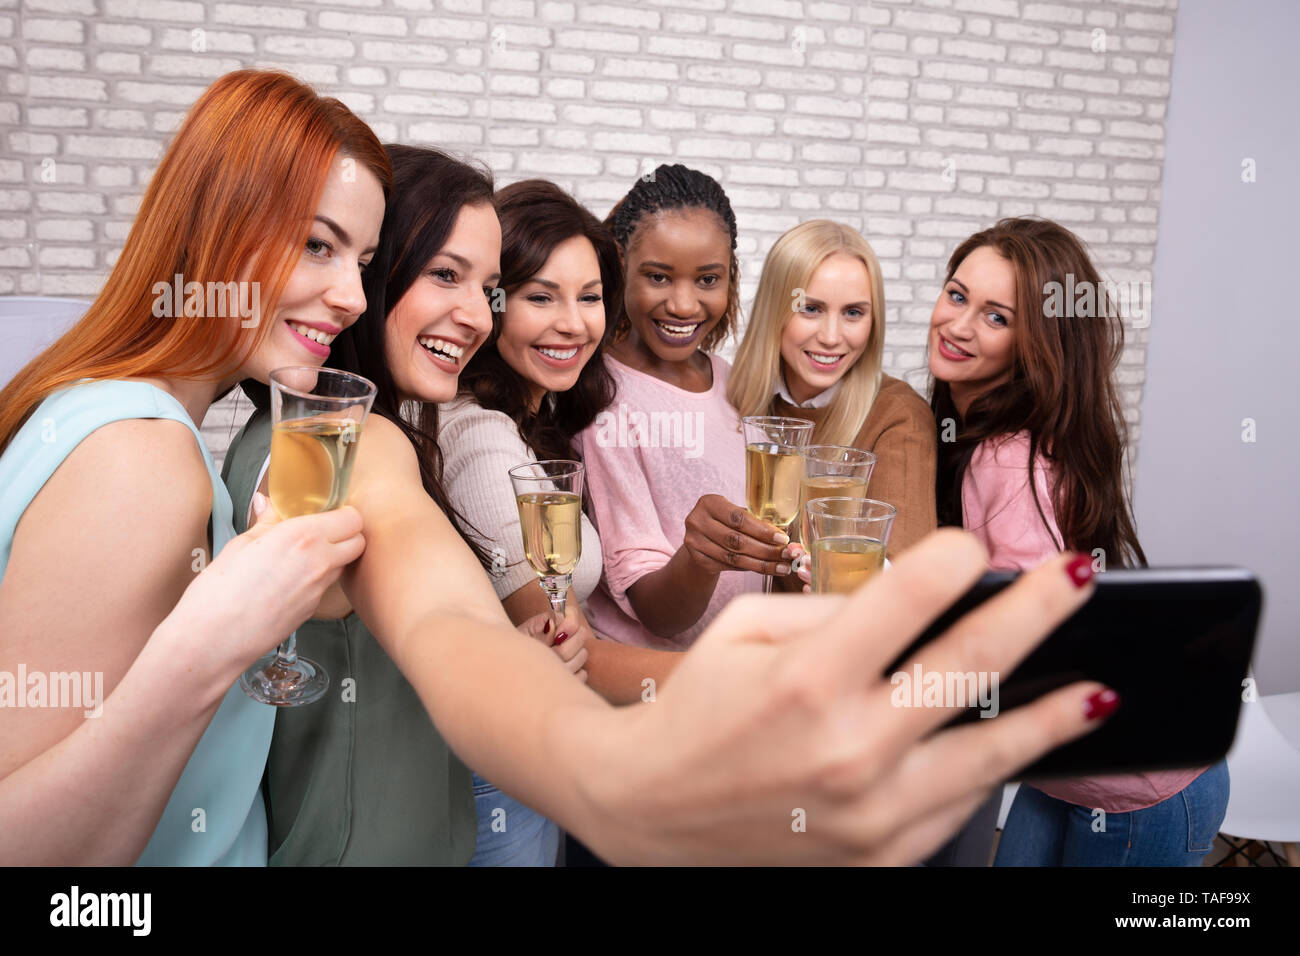 Happy Women With Champagne And Smartphone Taking Selfie At Night Club Stock Photo